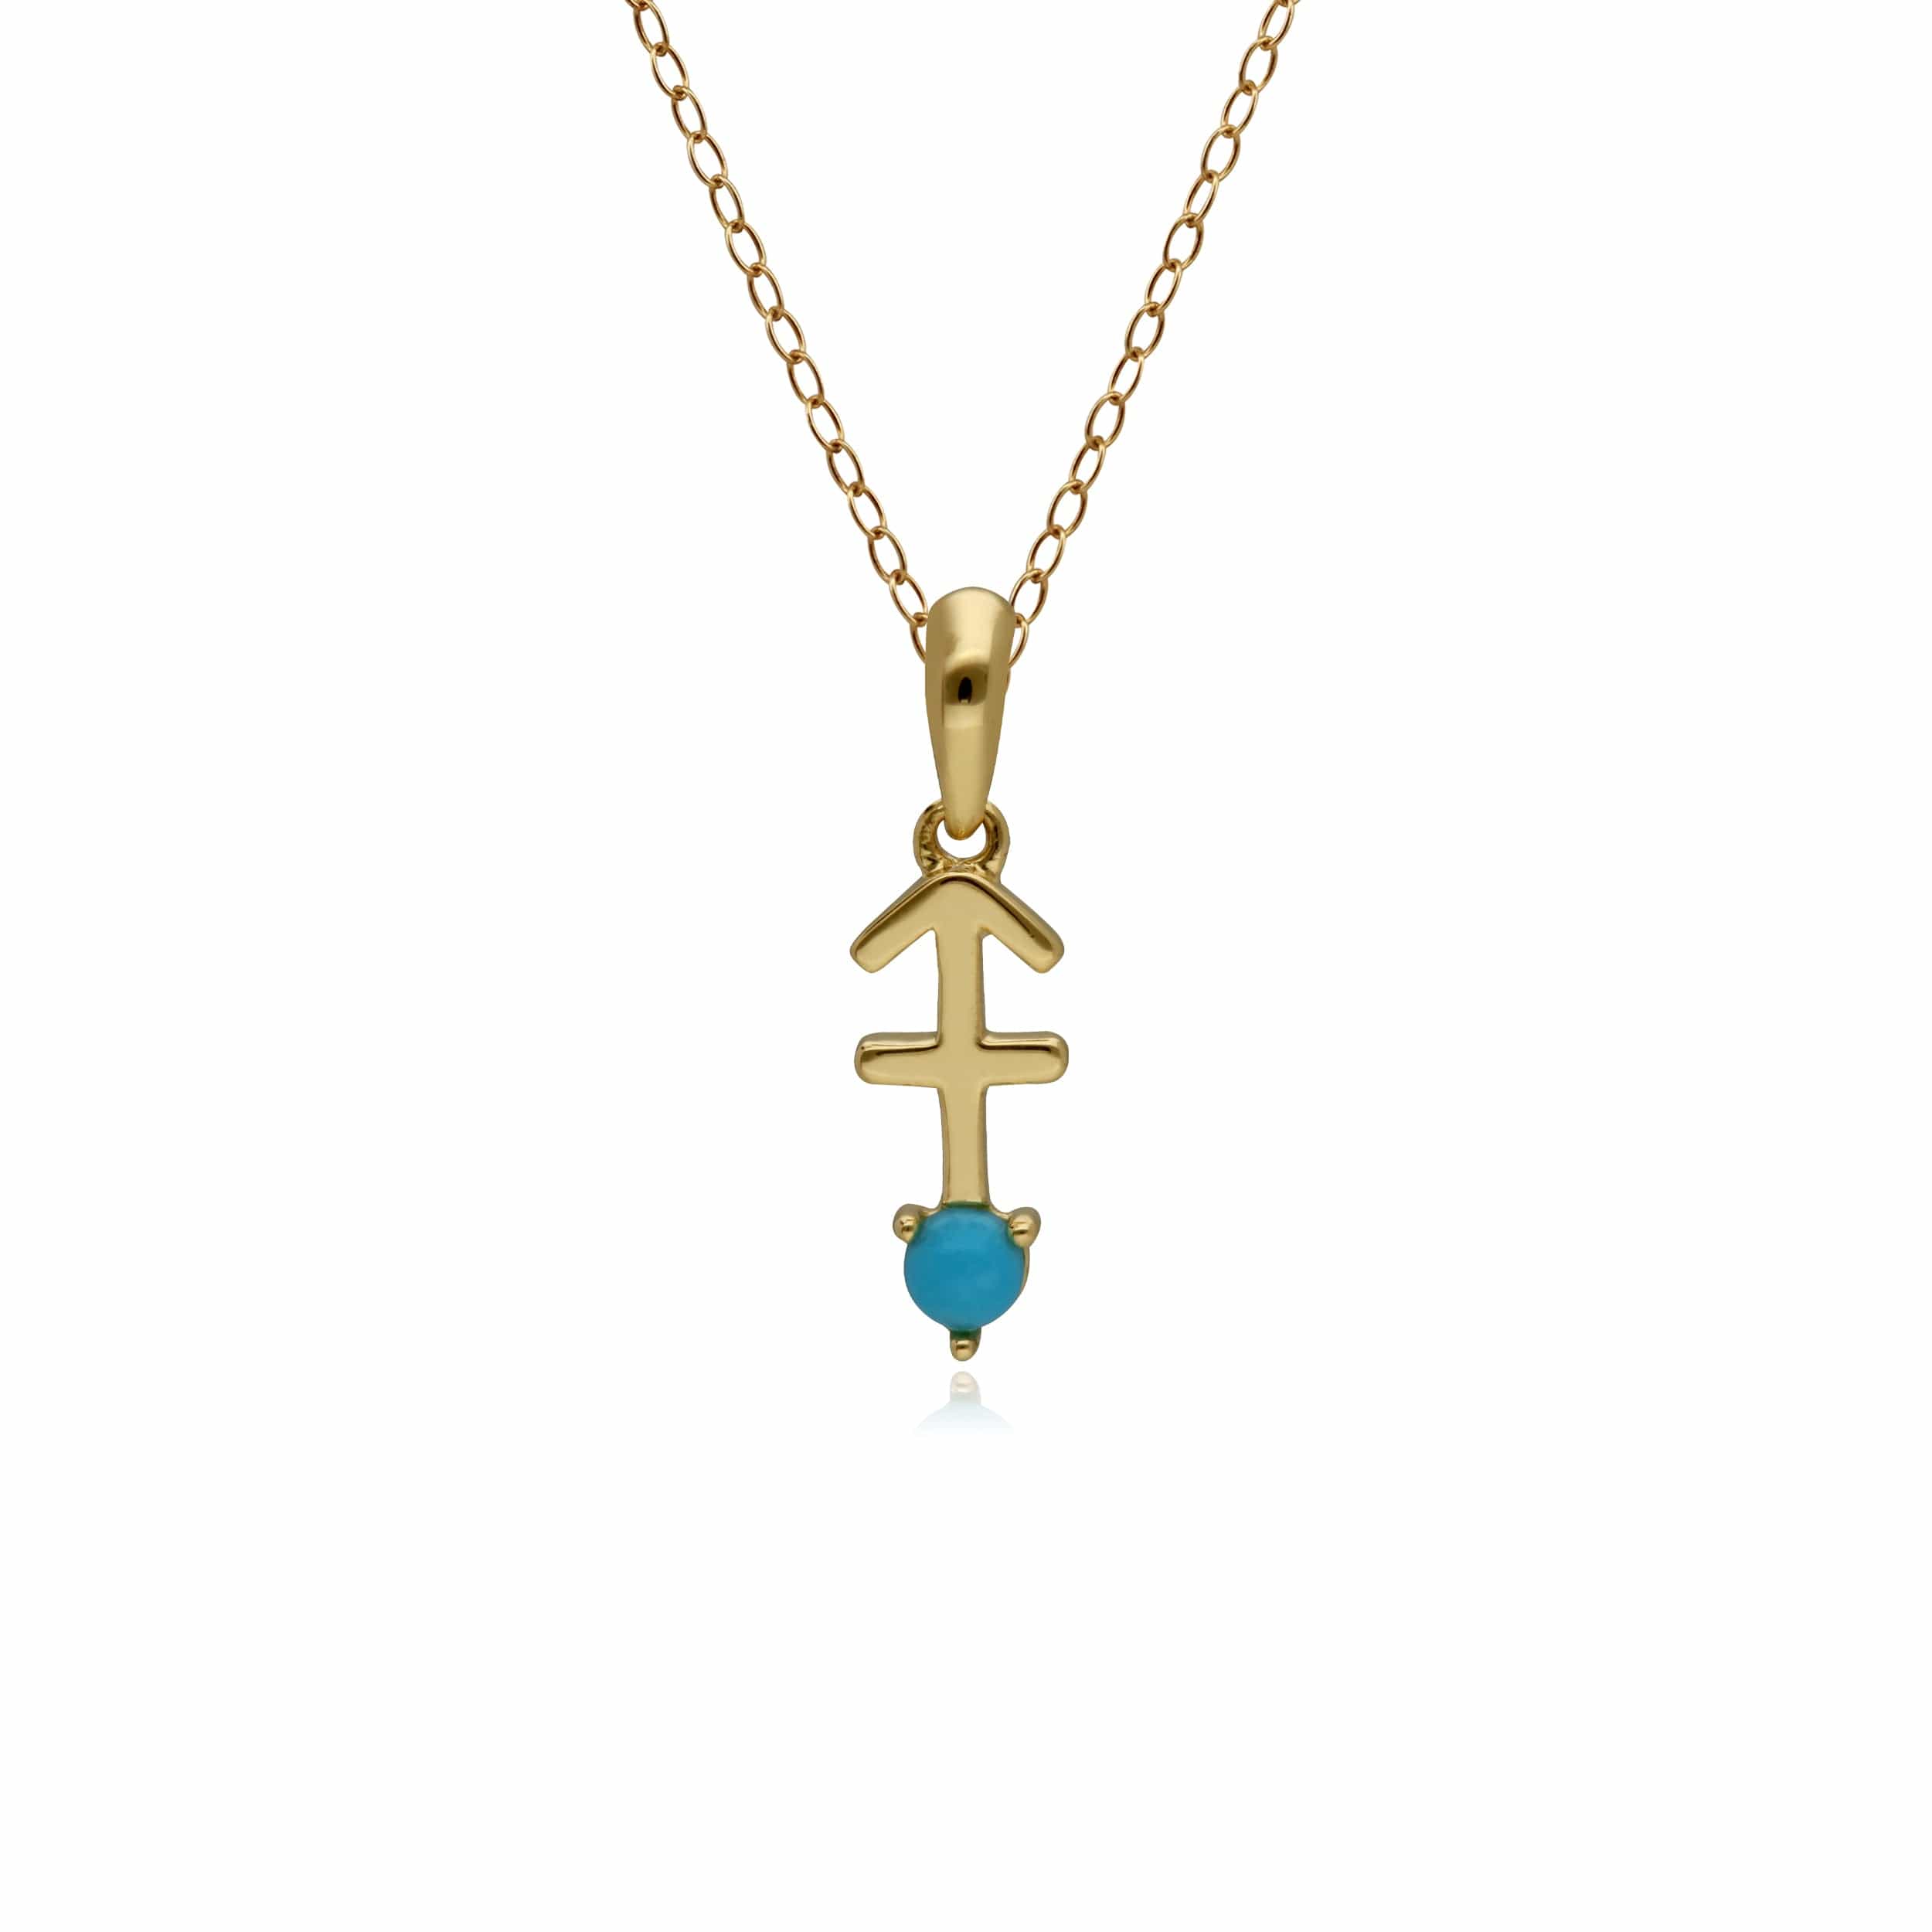 Photos - Pendant / Choker Necklace Turquoise Sagittarius Zodiac Charm Necklace in 9ct Yellow Gold